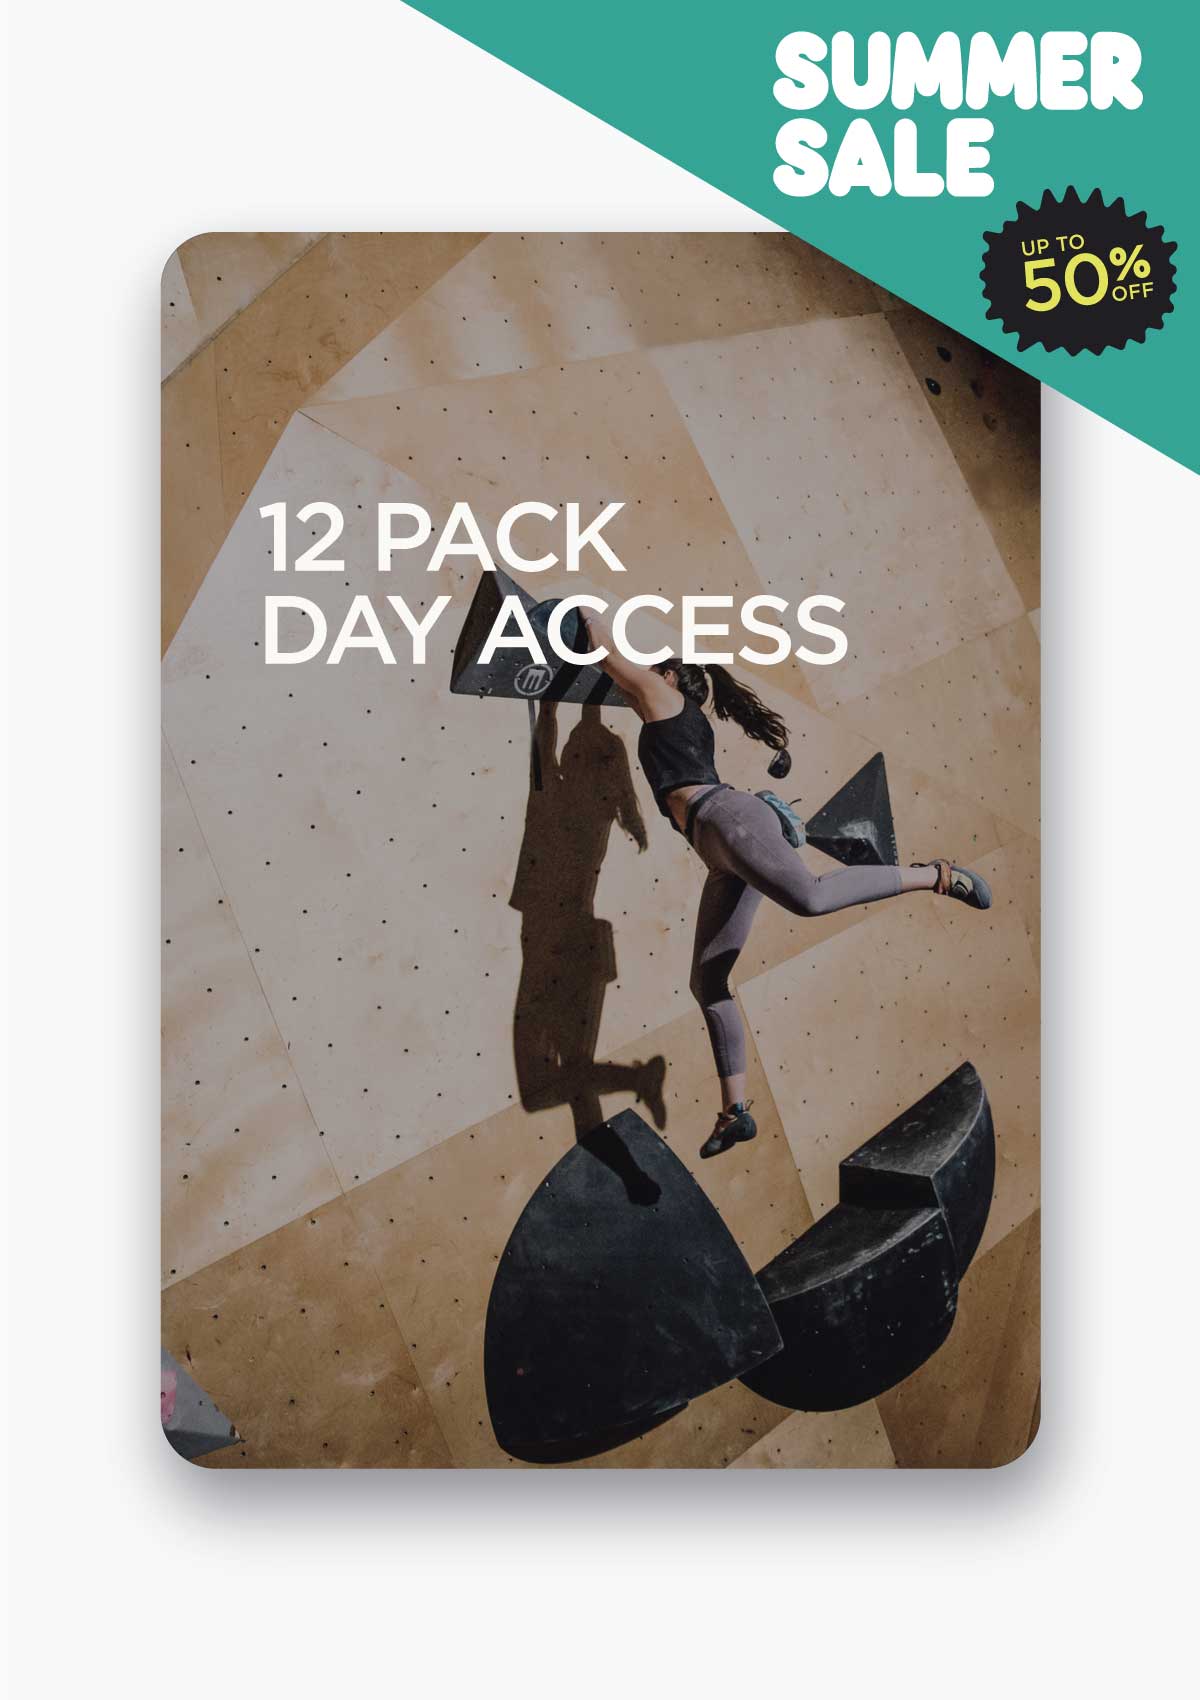 12 PACK DAY ACCESS SUMMER SALE